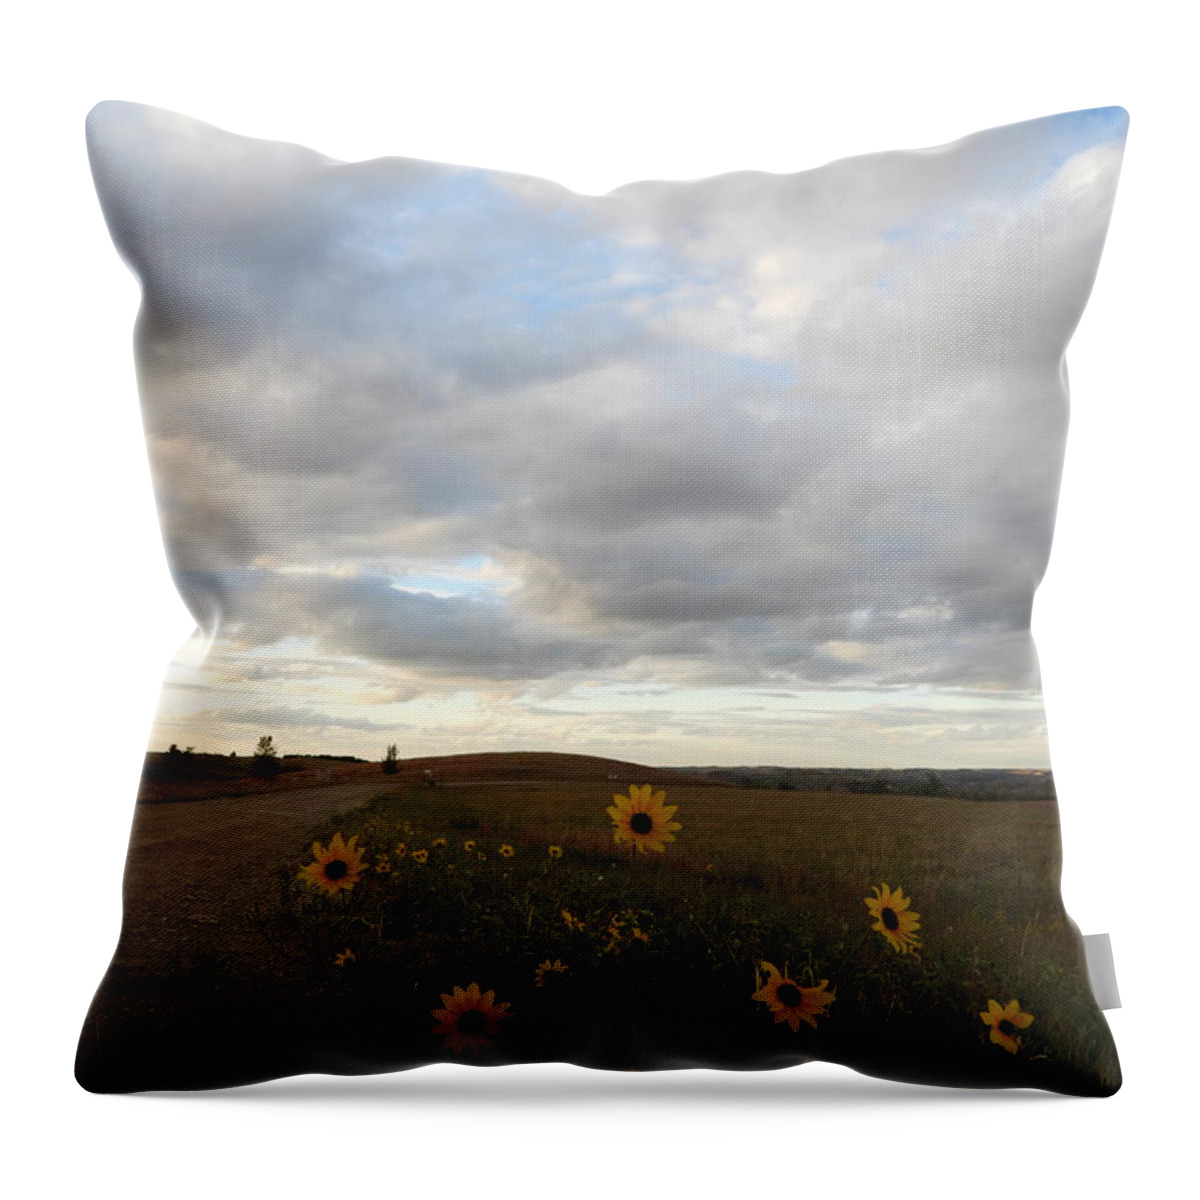 Sunflowers Throw Pillow featuring the photograph Evening Sunflowers by Amanda R Wright